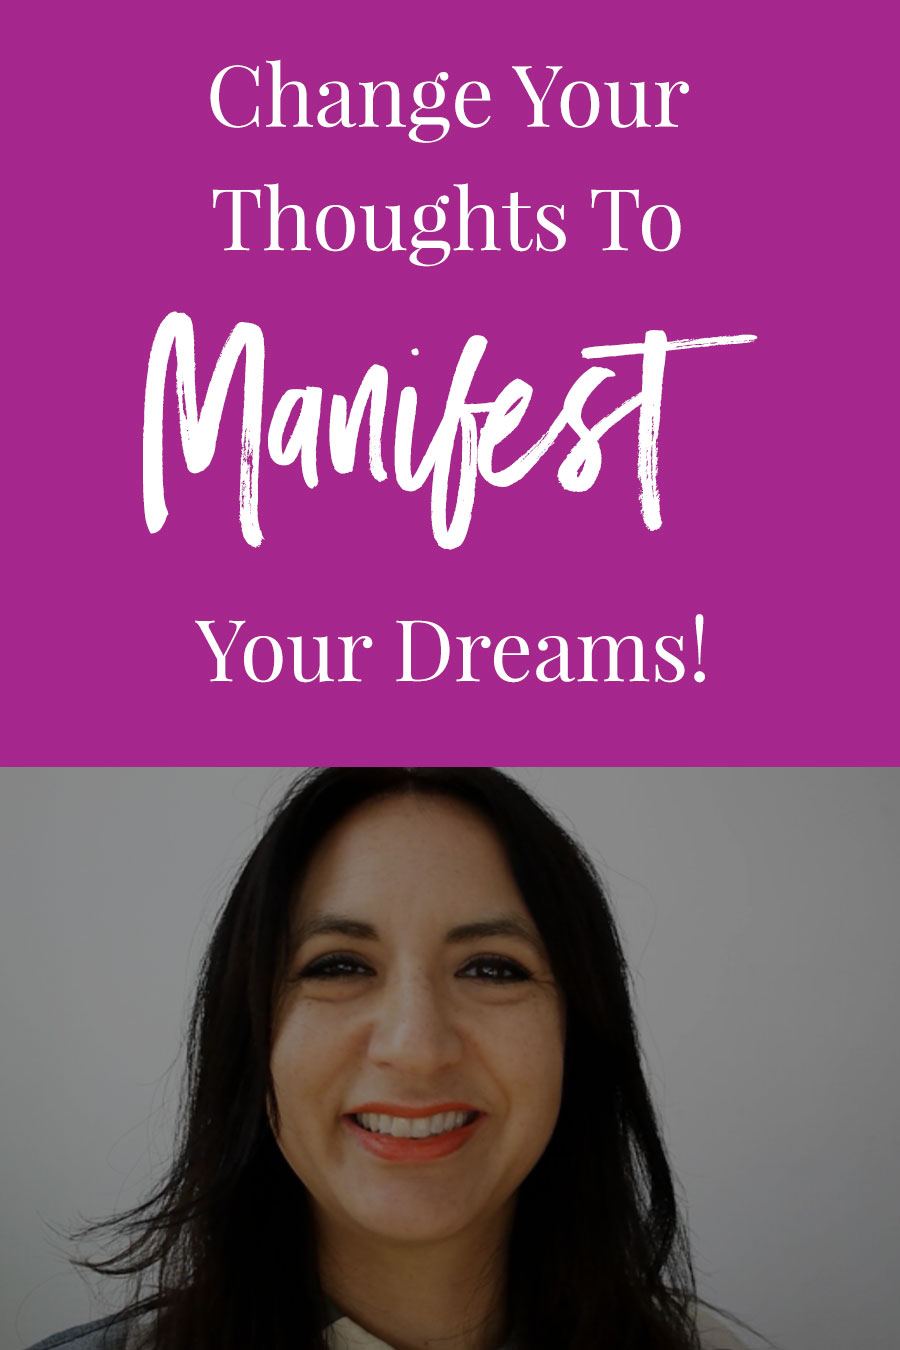 Change Your Thoughts To Manifest Your Dreams!